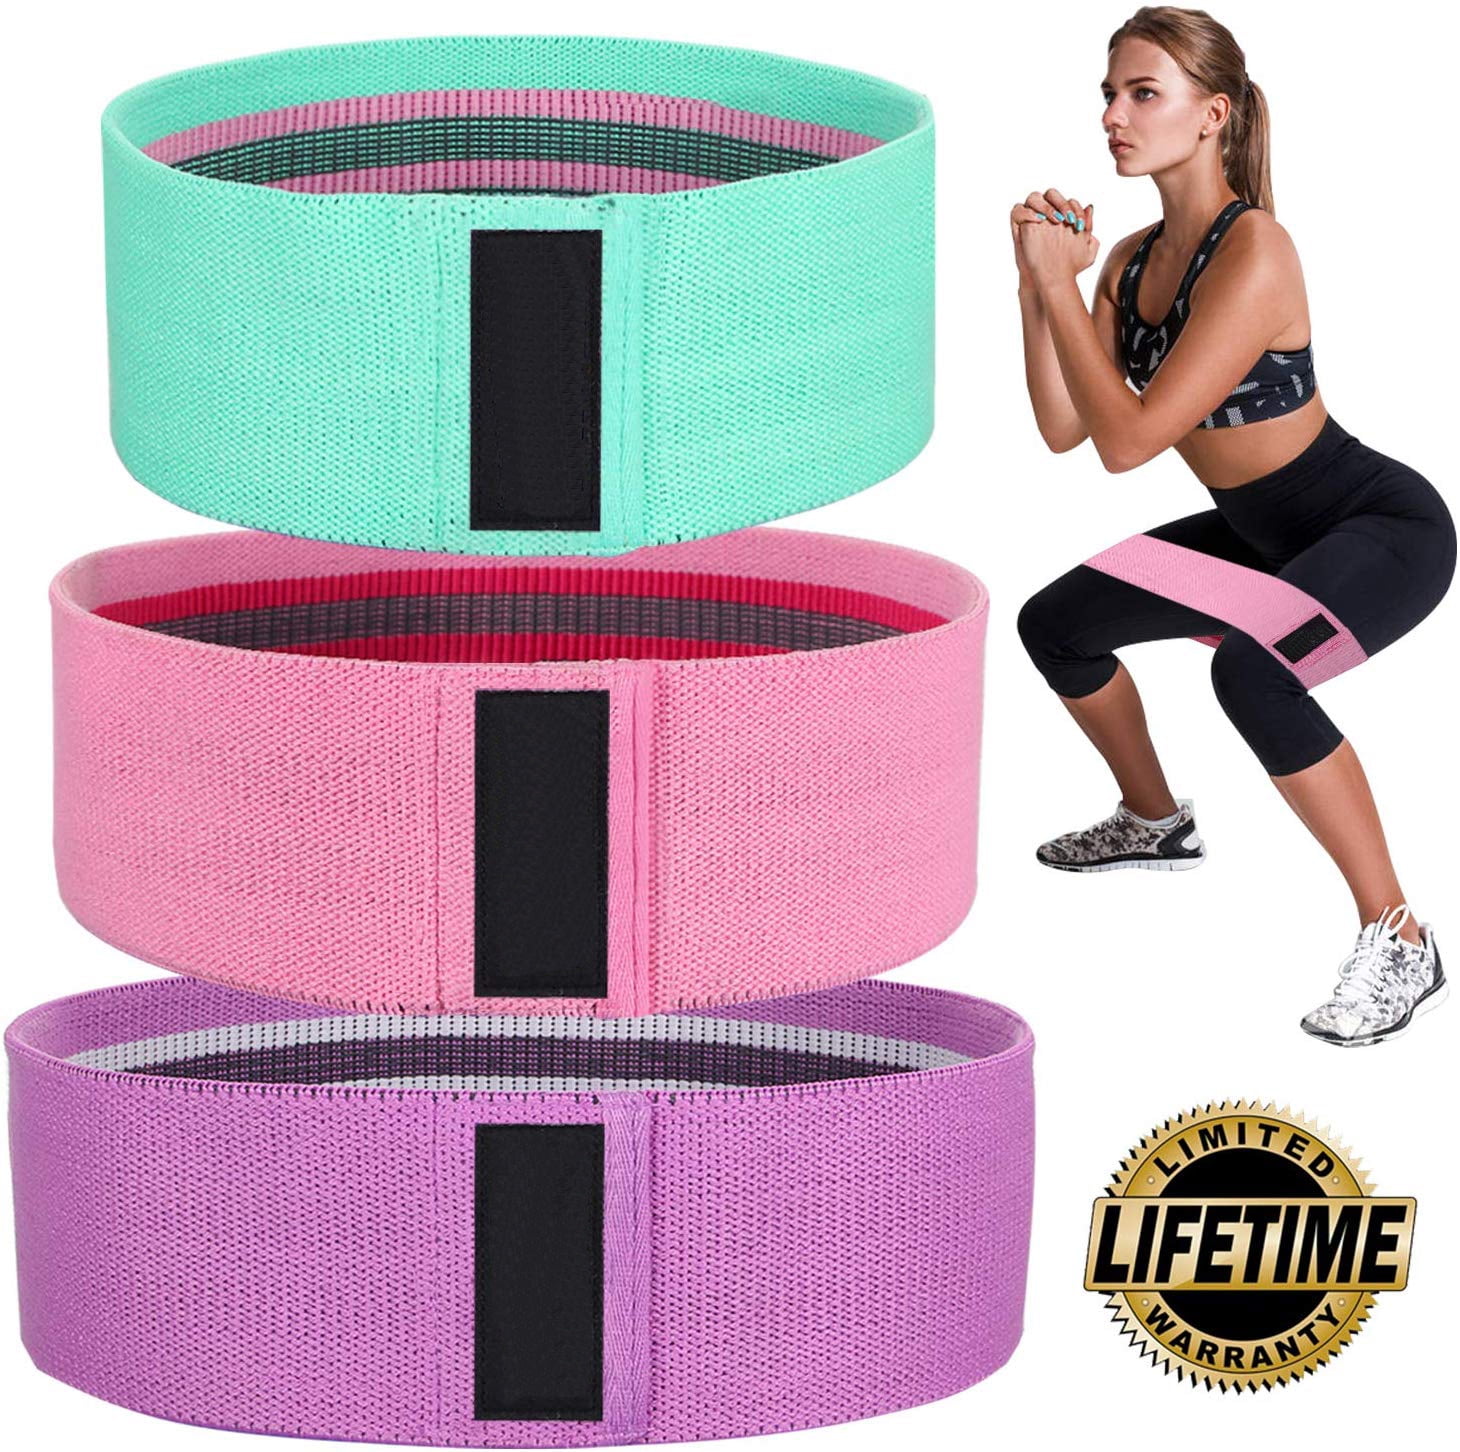 From Basic to Professional Widely-Used Thick&Durable Workout Resistance Bands